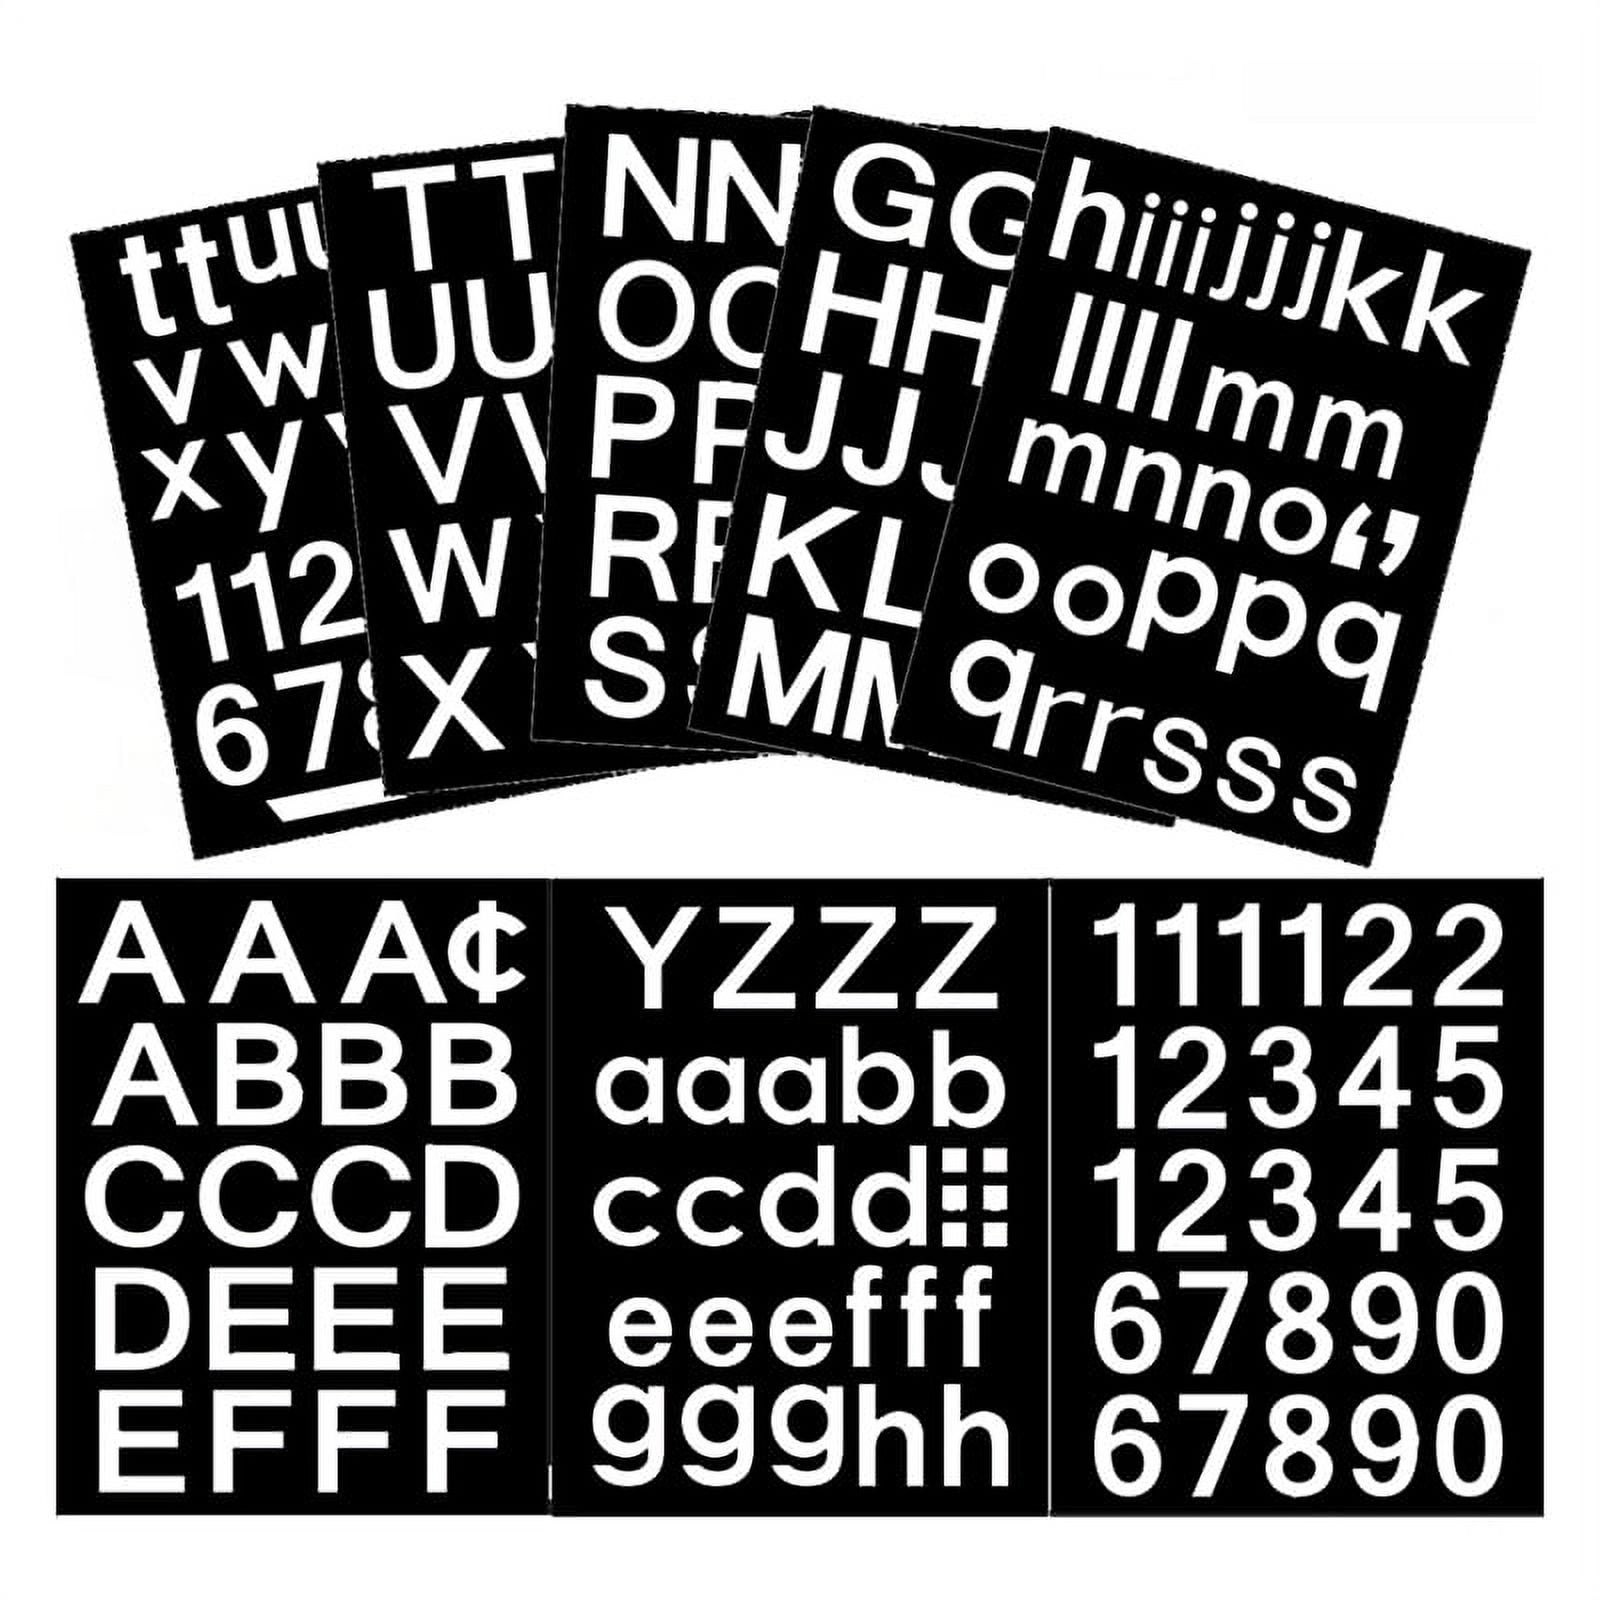 8 Sheets Self-Adhesive Vinyl Letters Numbers Kit, Mailbox Numbers Sticker for Mailbox,Signs,Window,Cars,Address Number, Size: One size, White